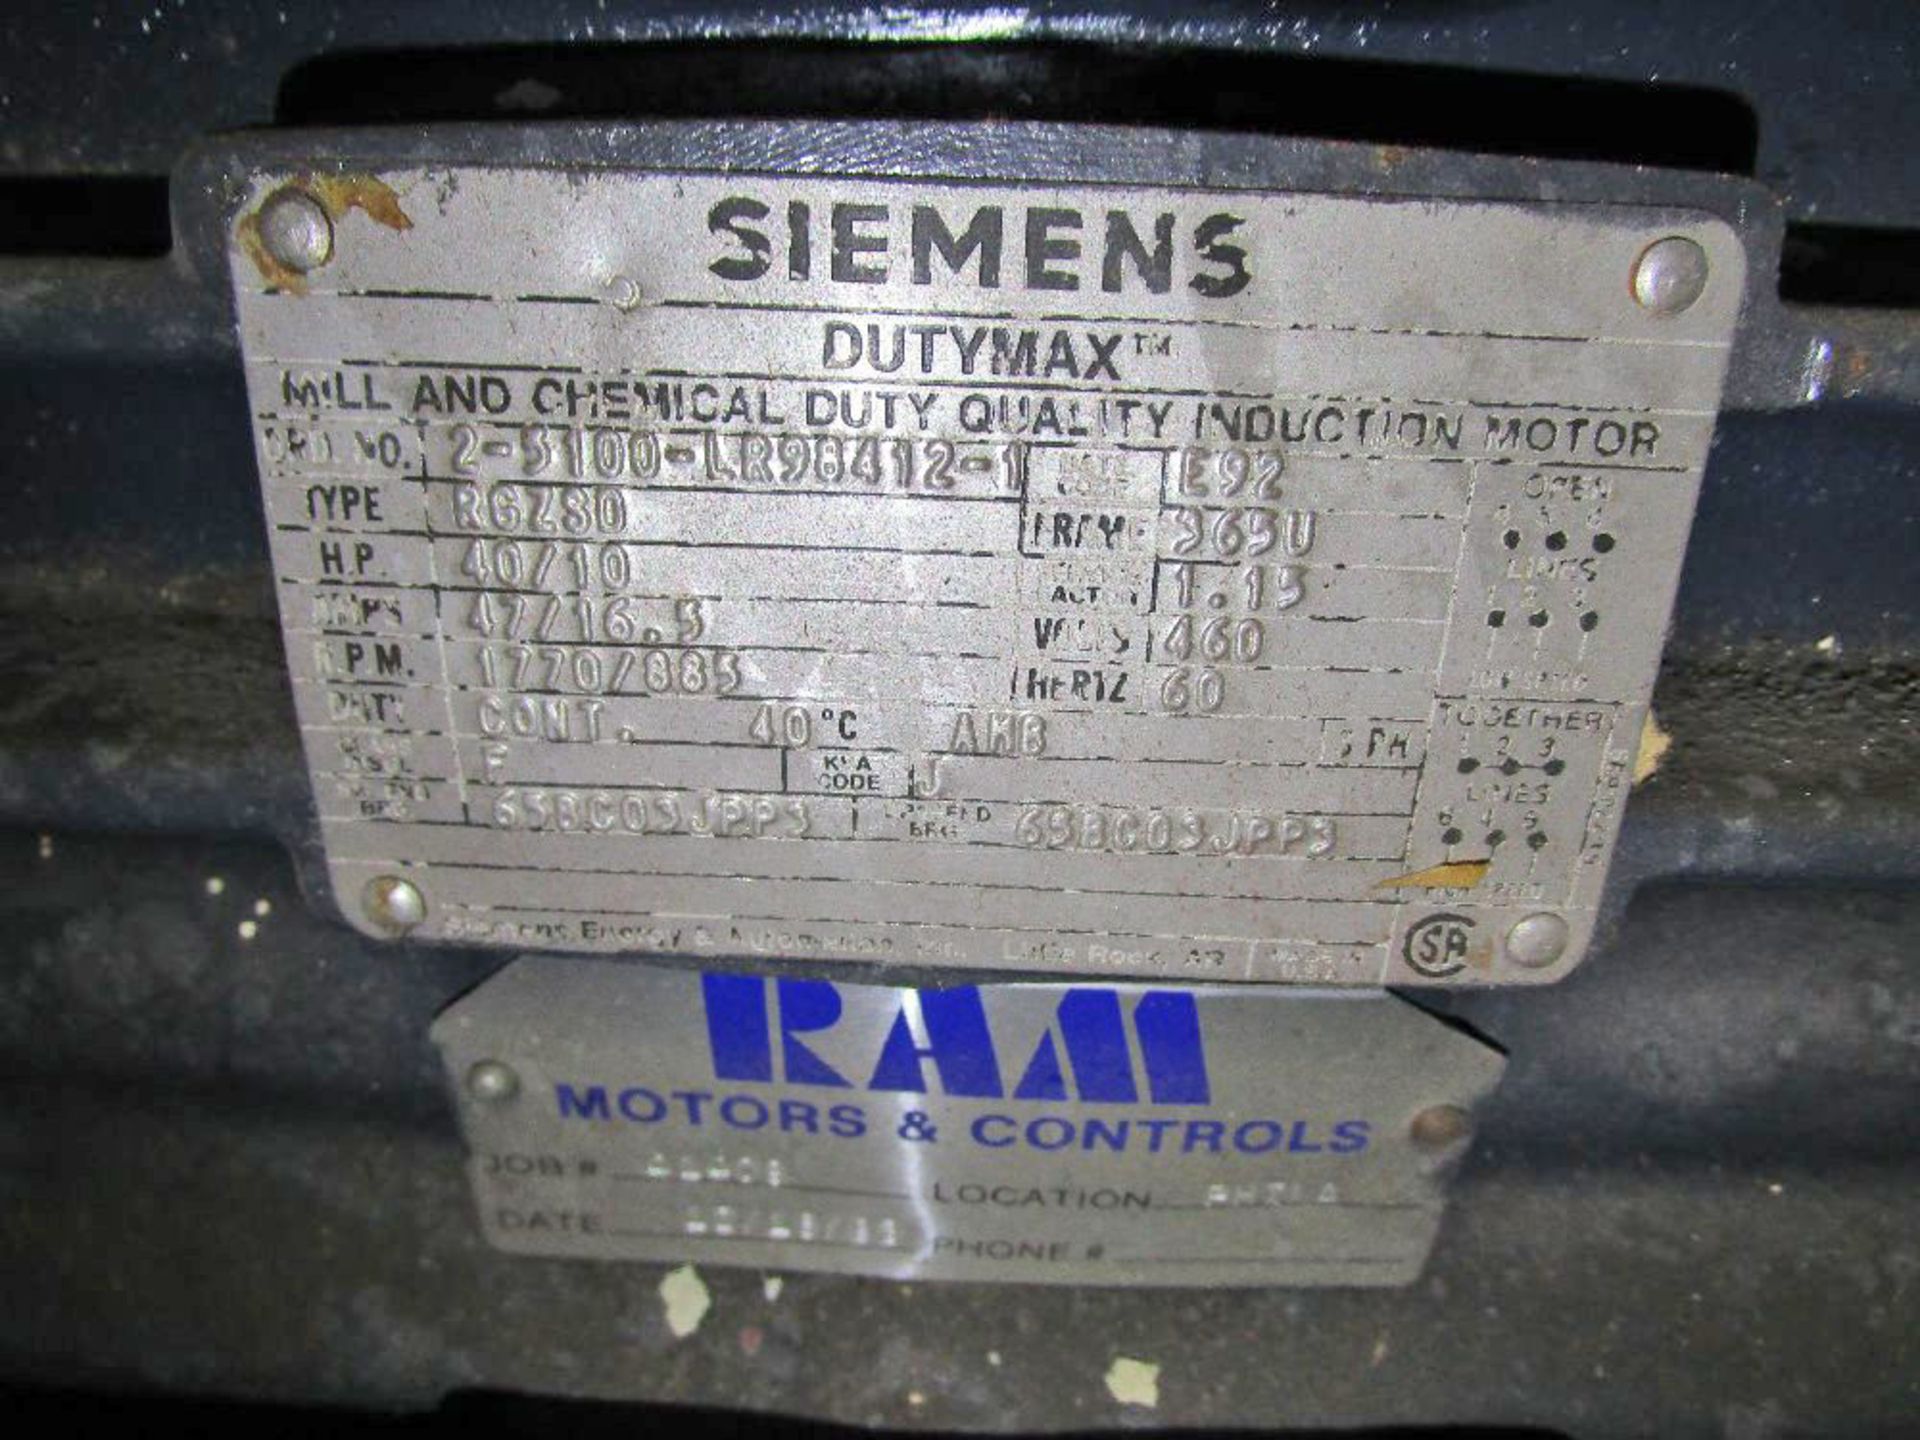 Siemens Model RGZSO 40 HP Electric Induction Motor - Image 2 of 3